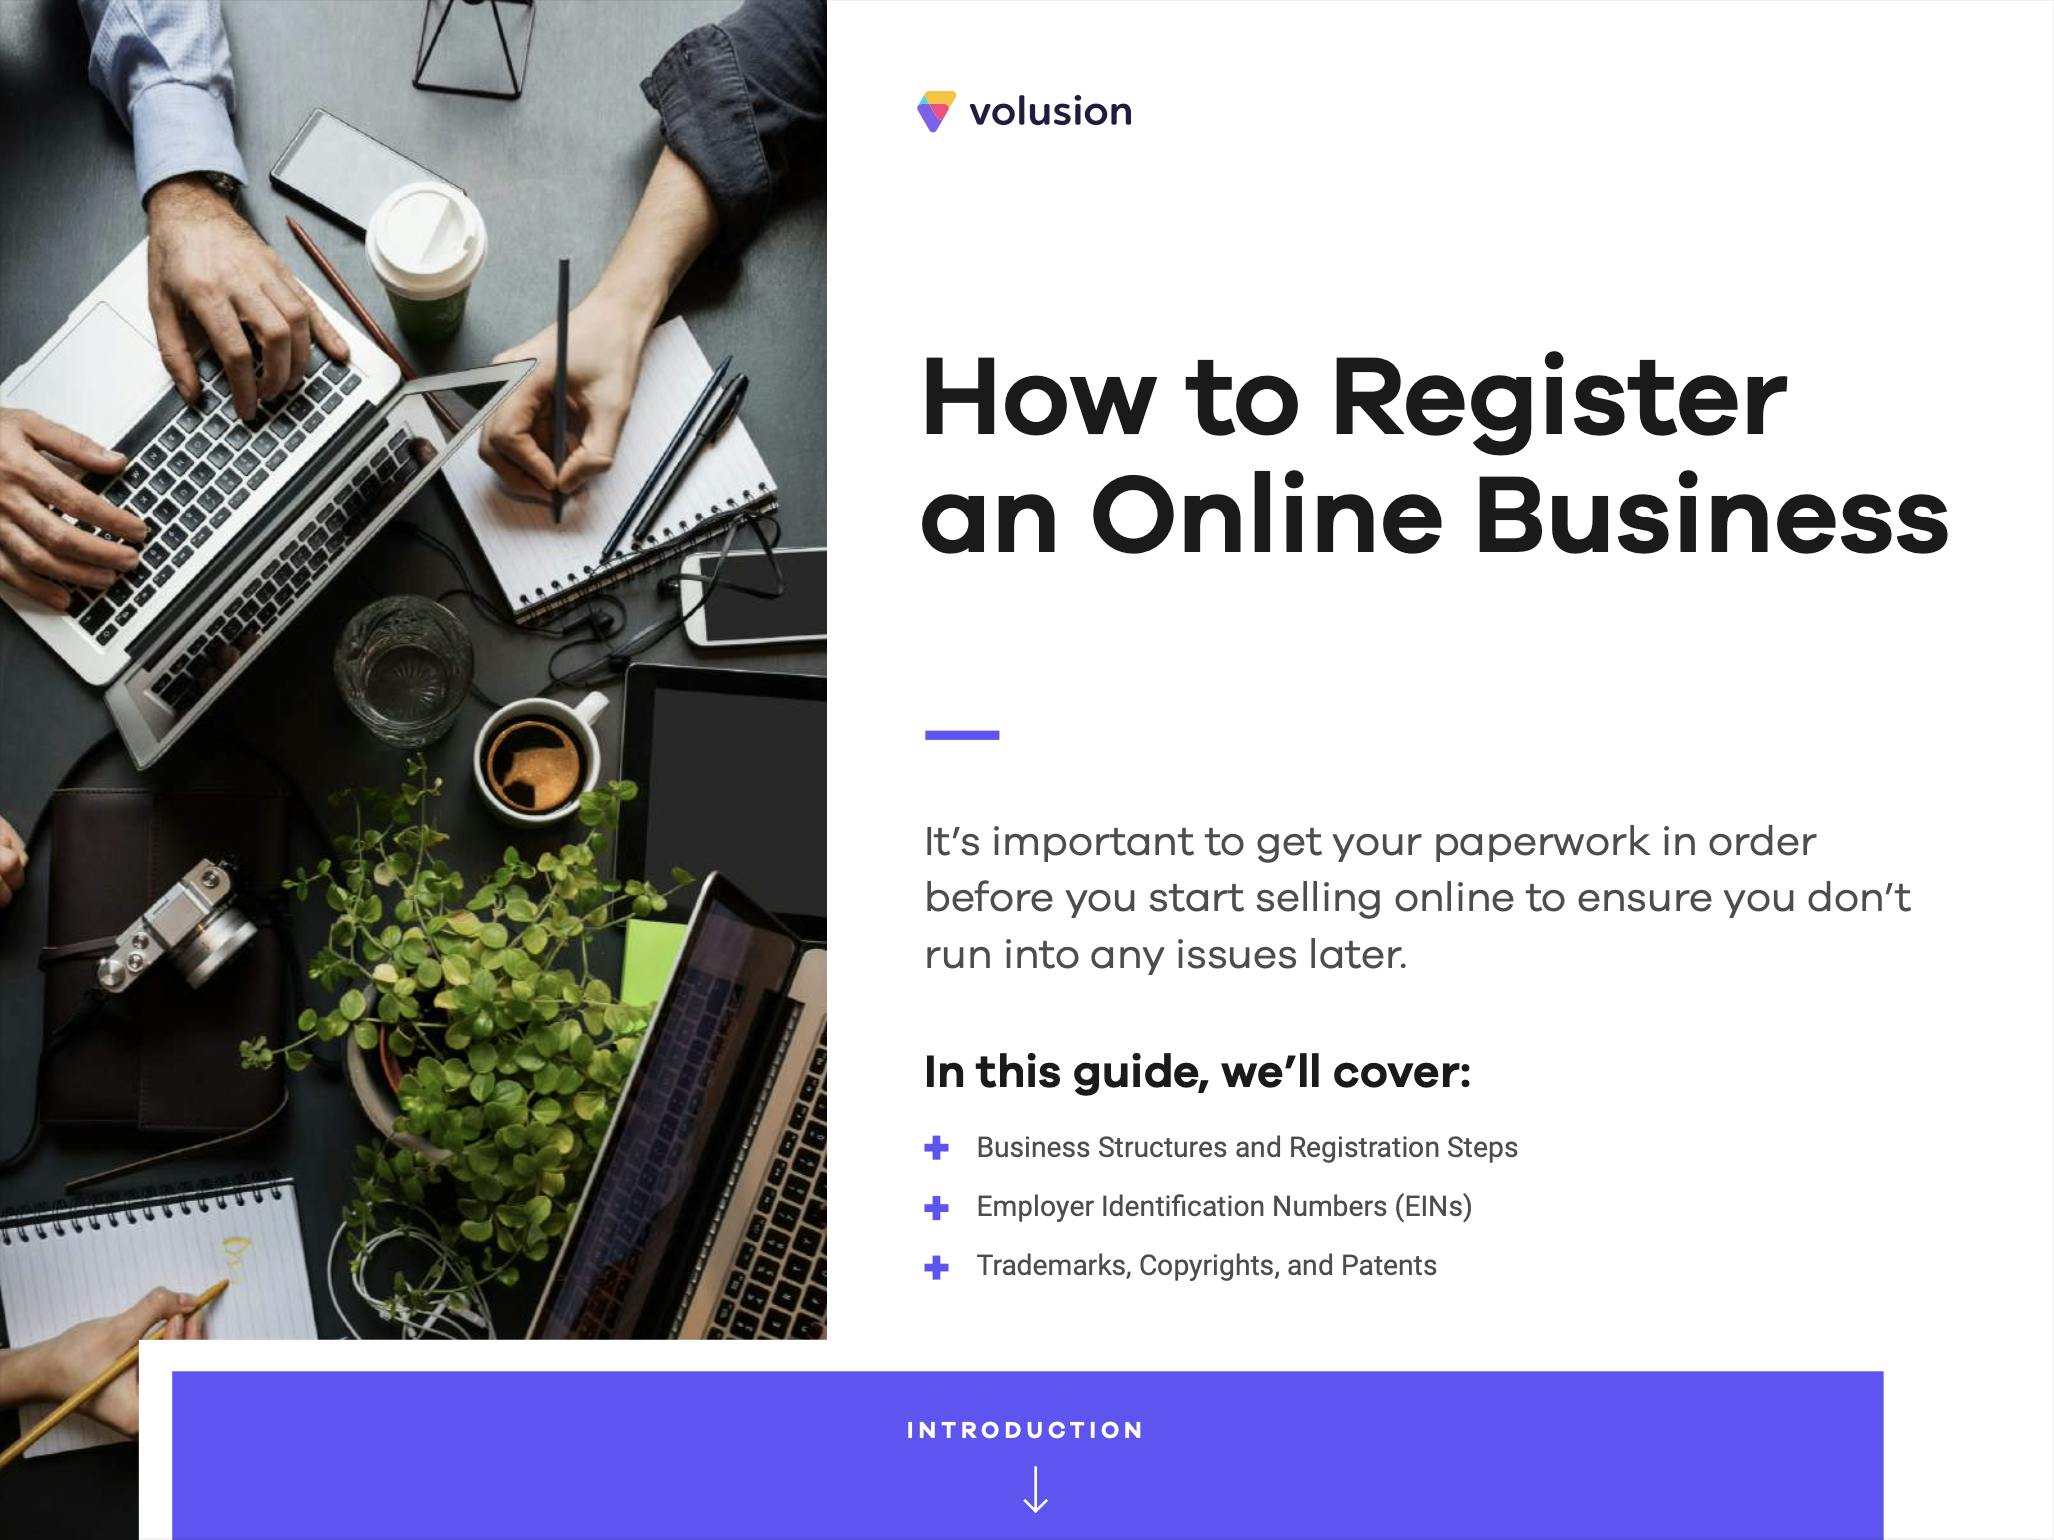 How to Register an Online Business